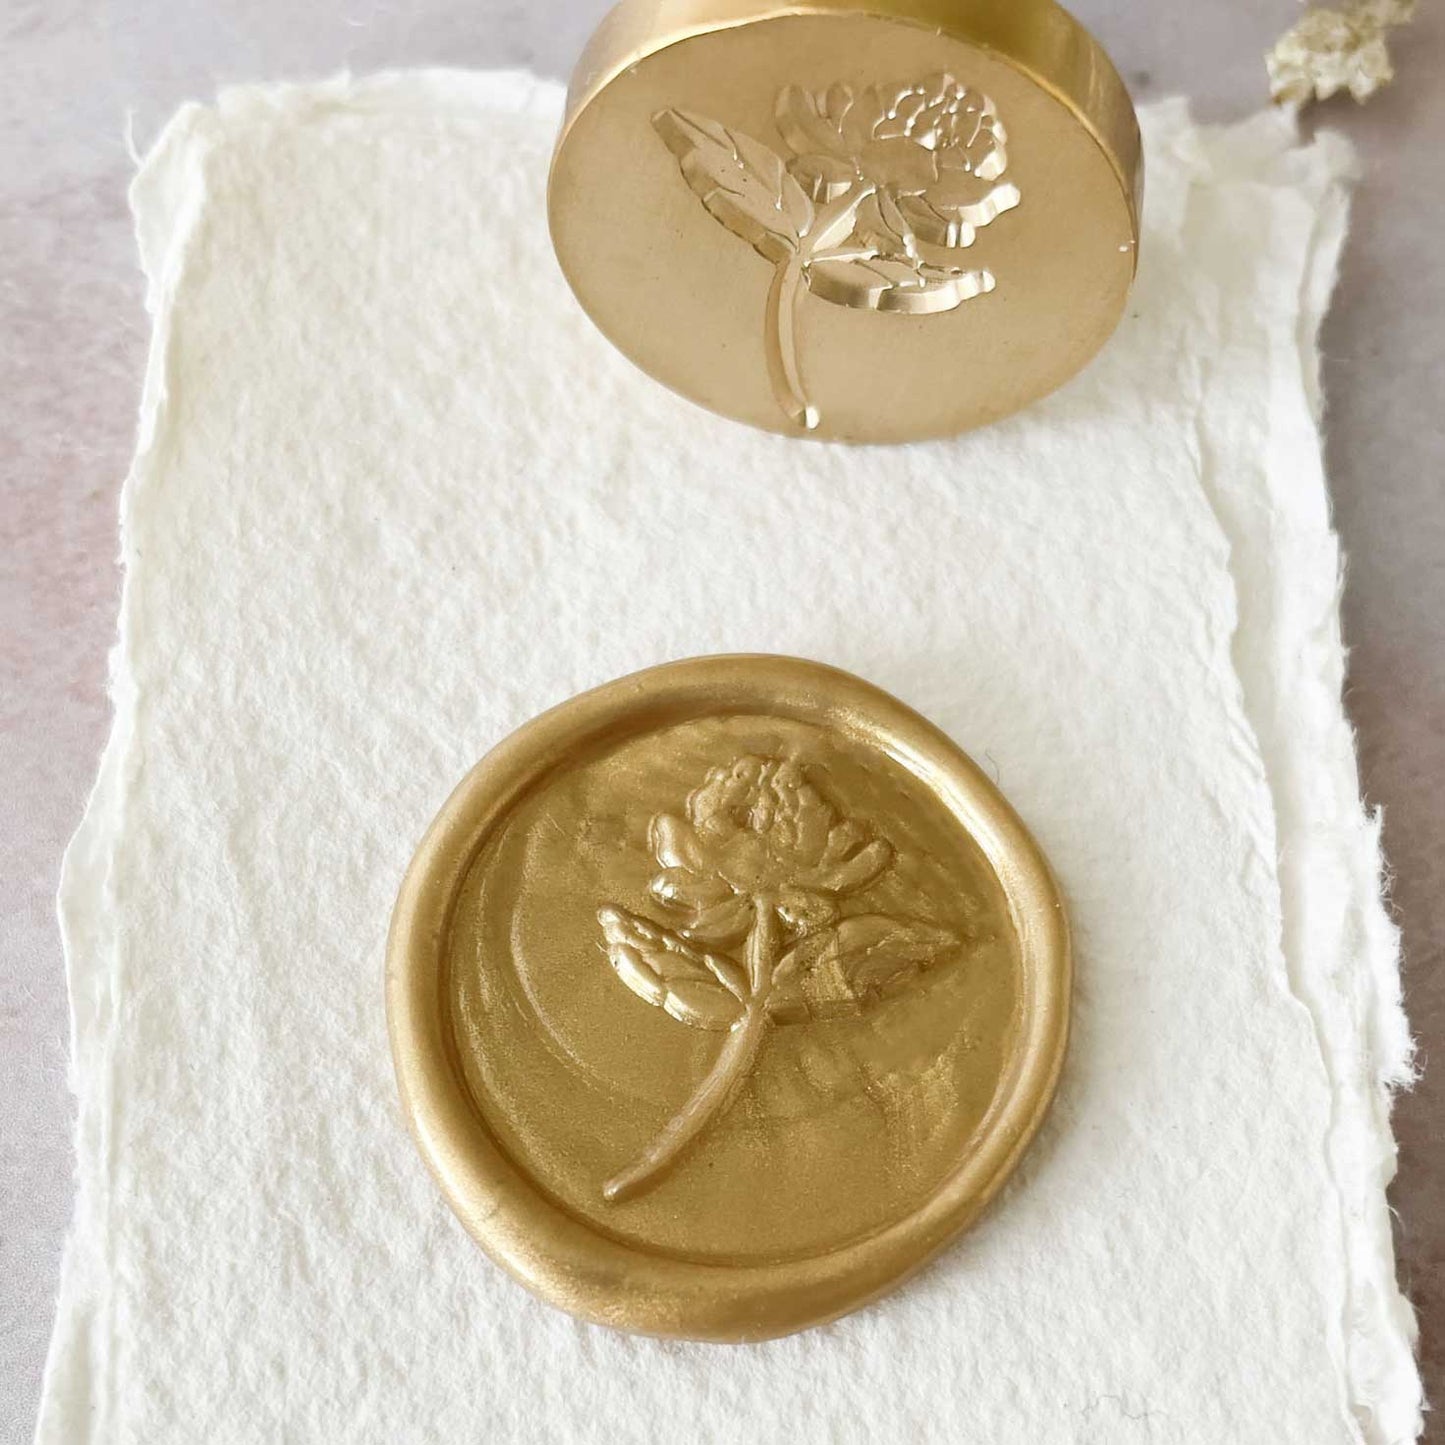 peony-wax-seal-with-peony-flower-for-wax-stamps